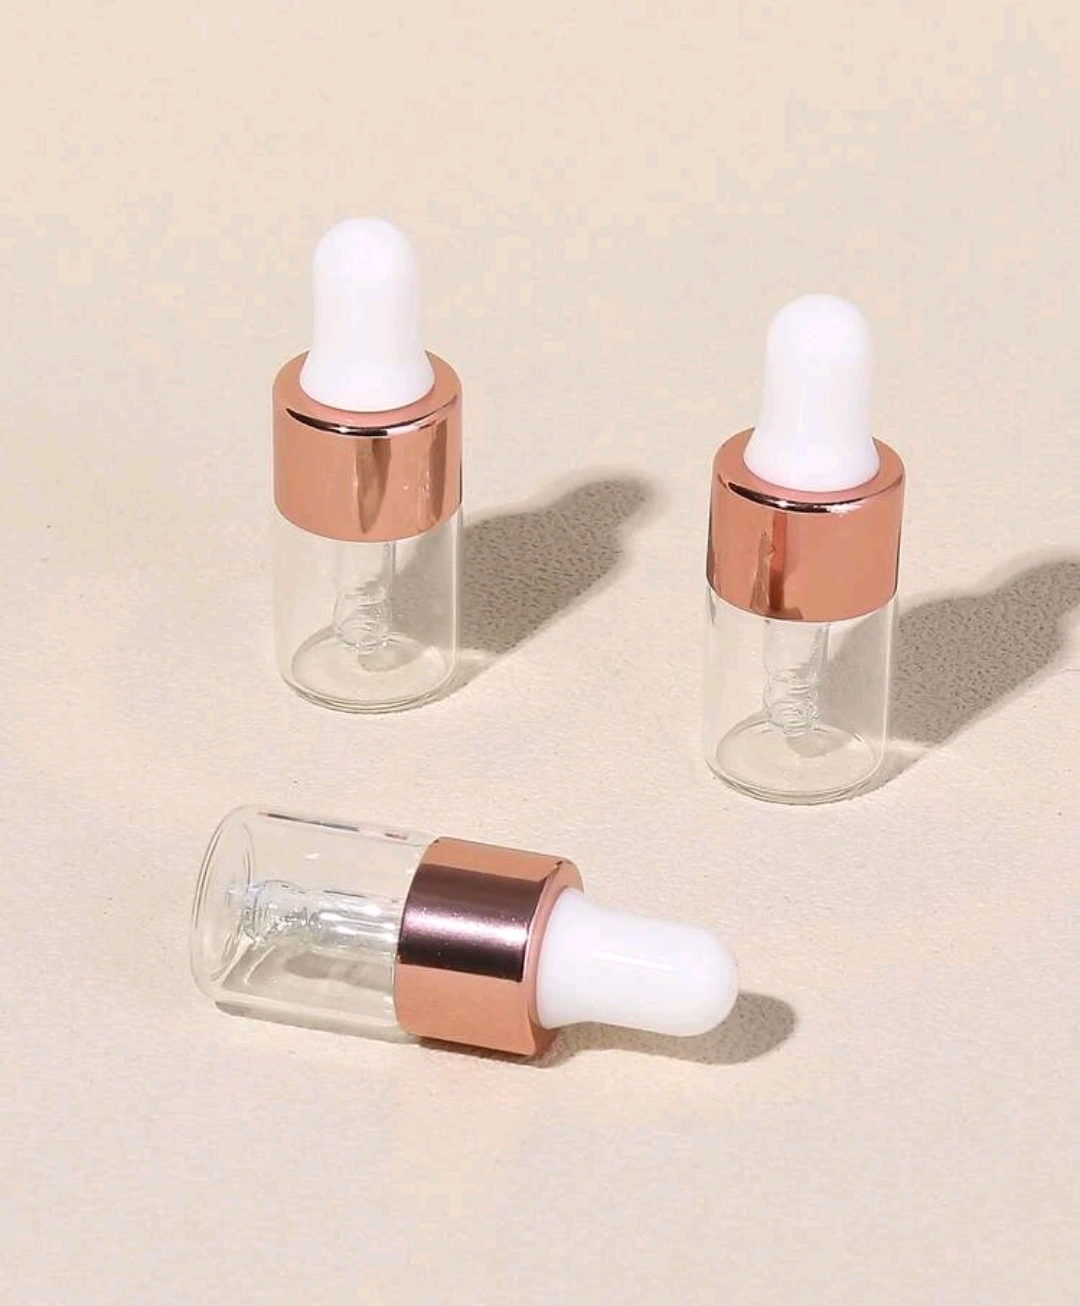 3pcs 2ml Mini Rose Gold Cap Glass Dropper Bottle Set For Essential Oils, Etc., Living Room Home Bedroom Bathroom House Decor, Travel Stuff, Wedding, Party, Birthday, Gifts For Men Mom Dad Friends, New Years, Accessories, Funny Gift